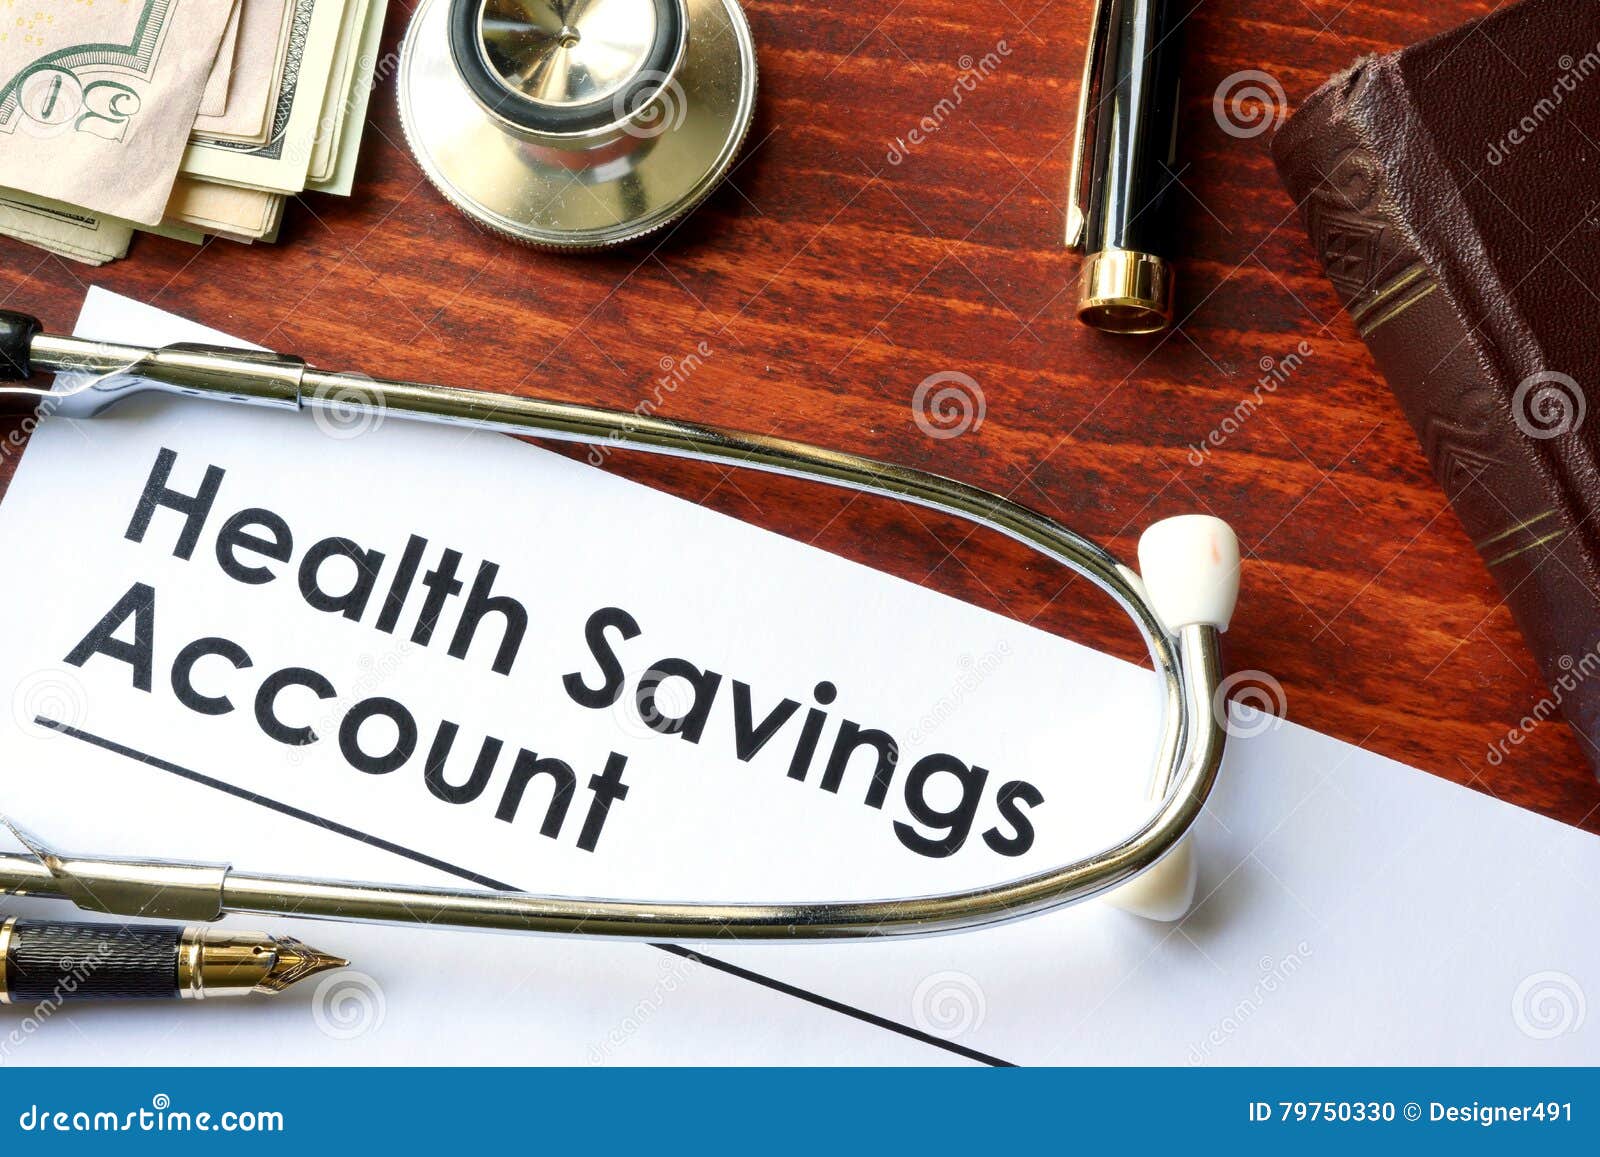 papers with health savings account hsa